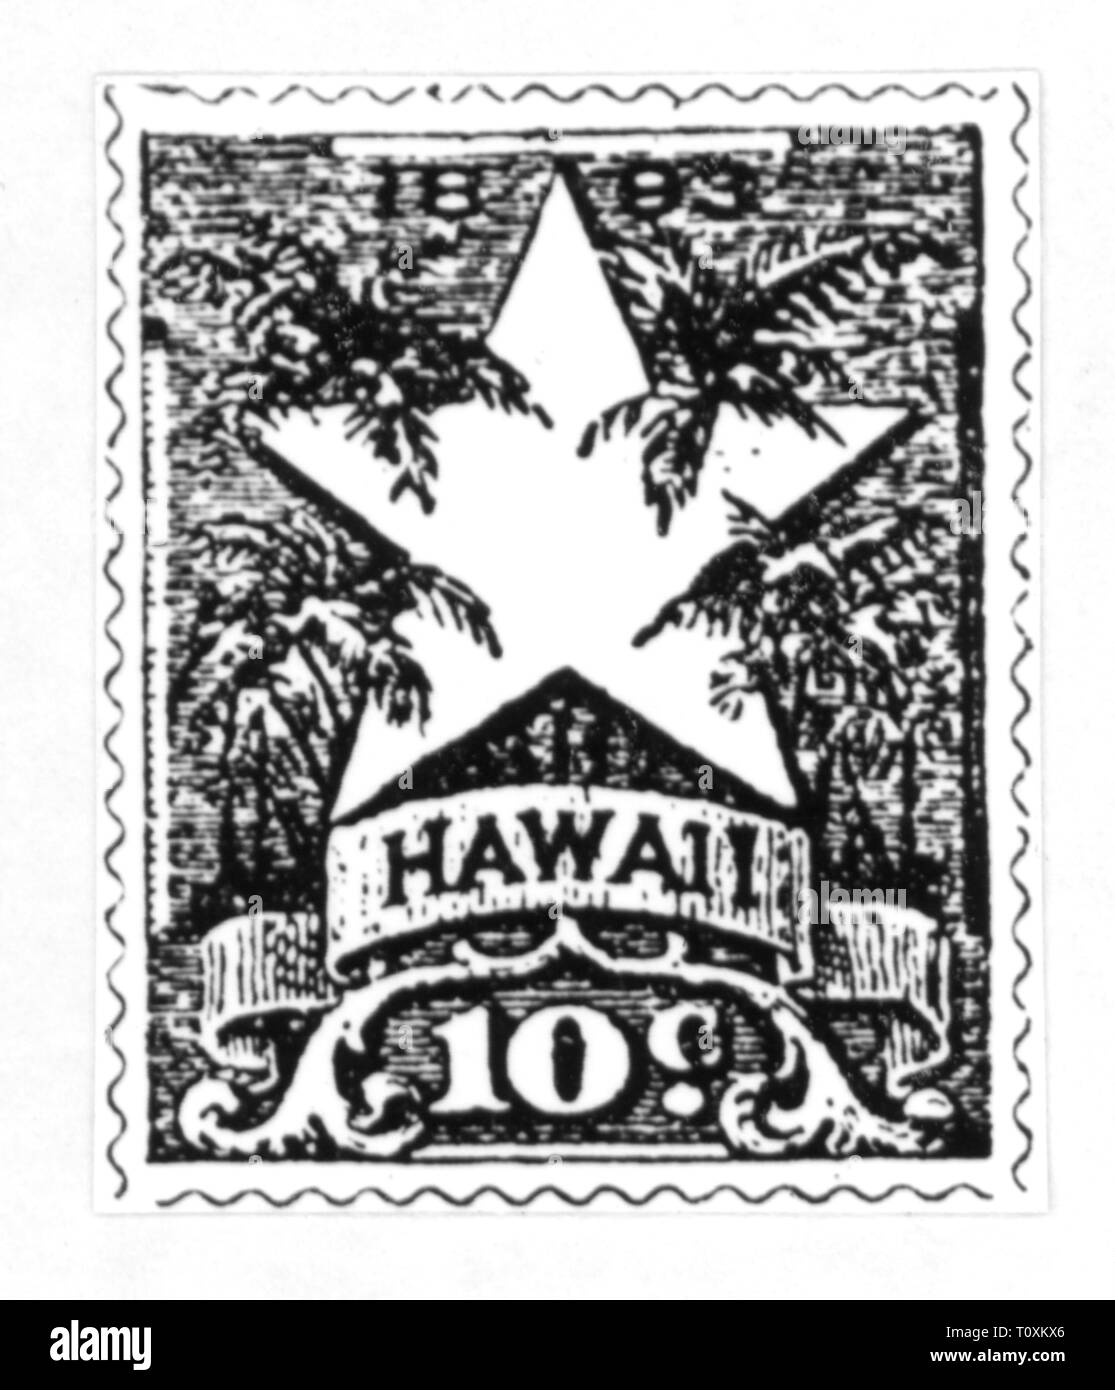 mail, postage stamps, USA, Republic of Hawaii, date of issue: 28.2